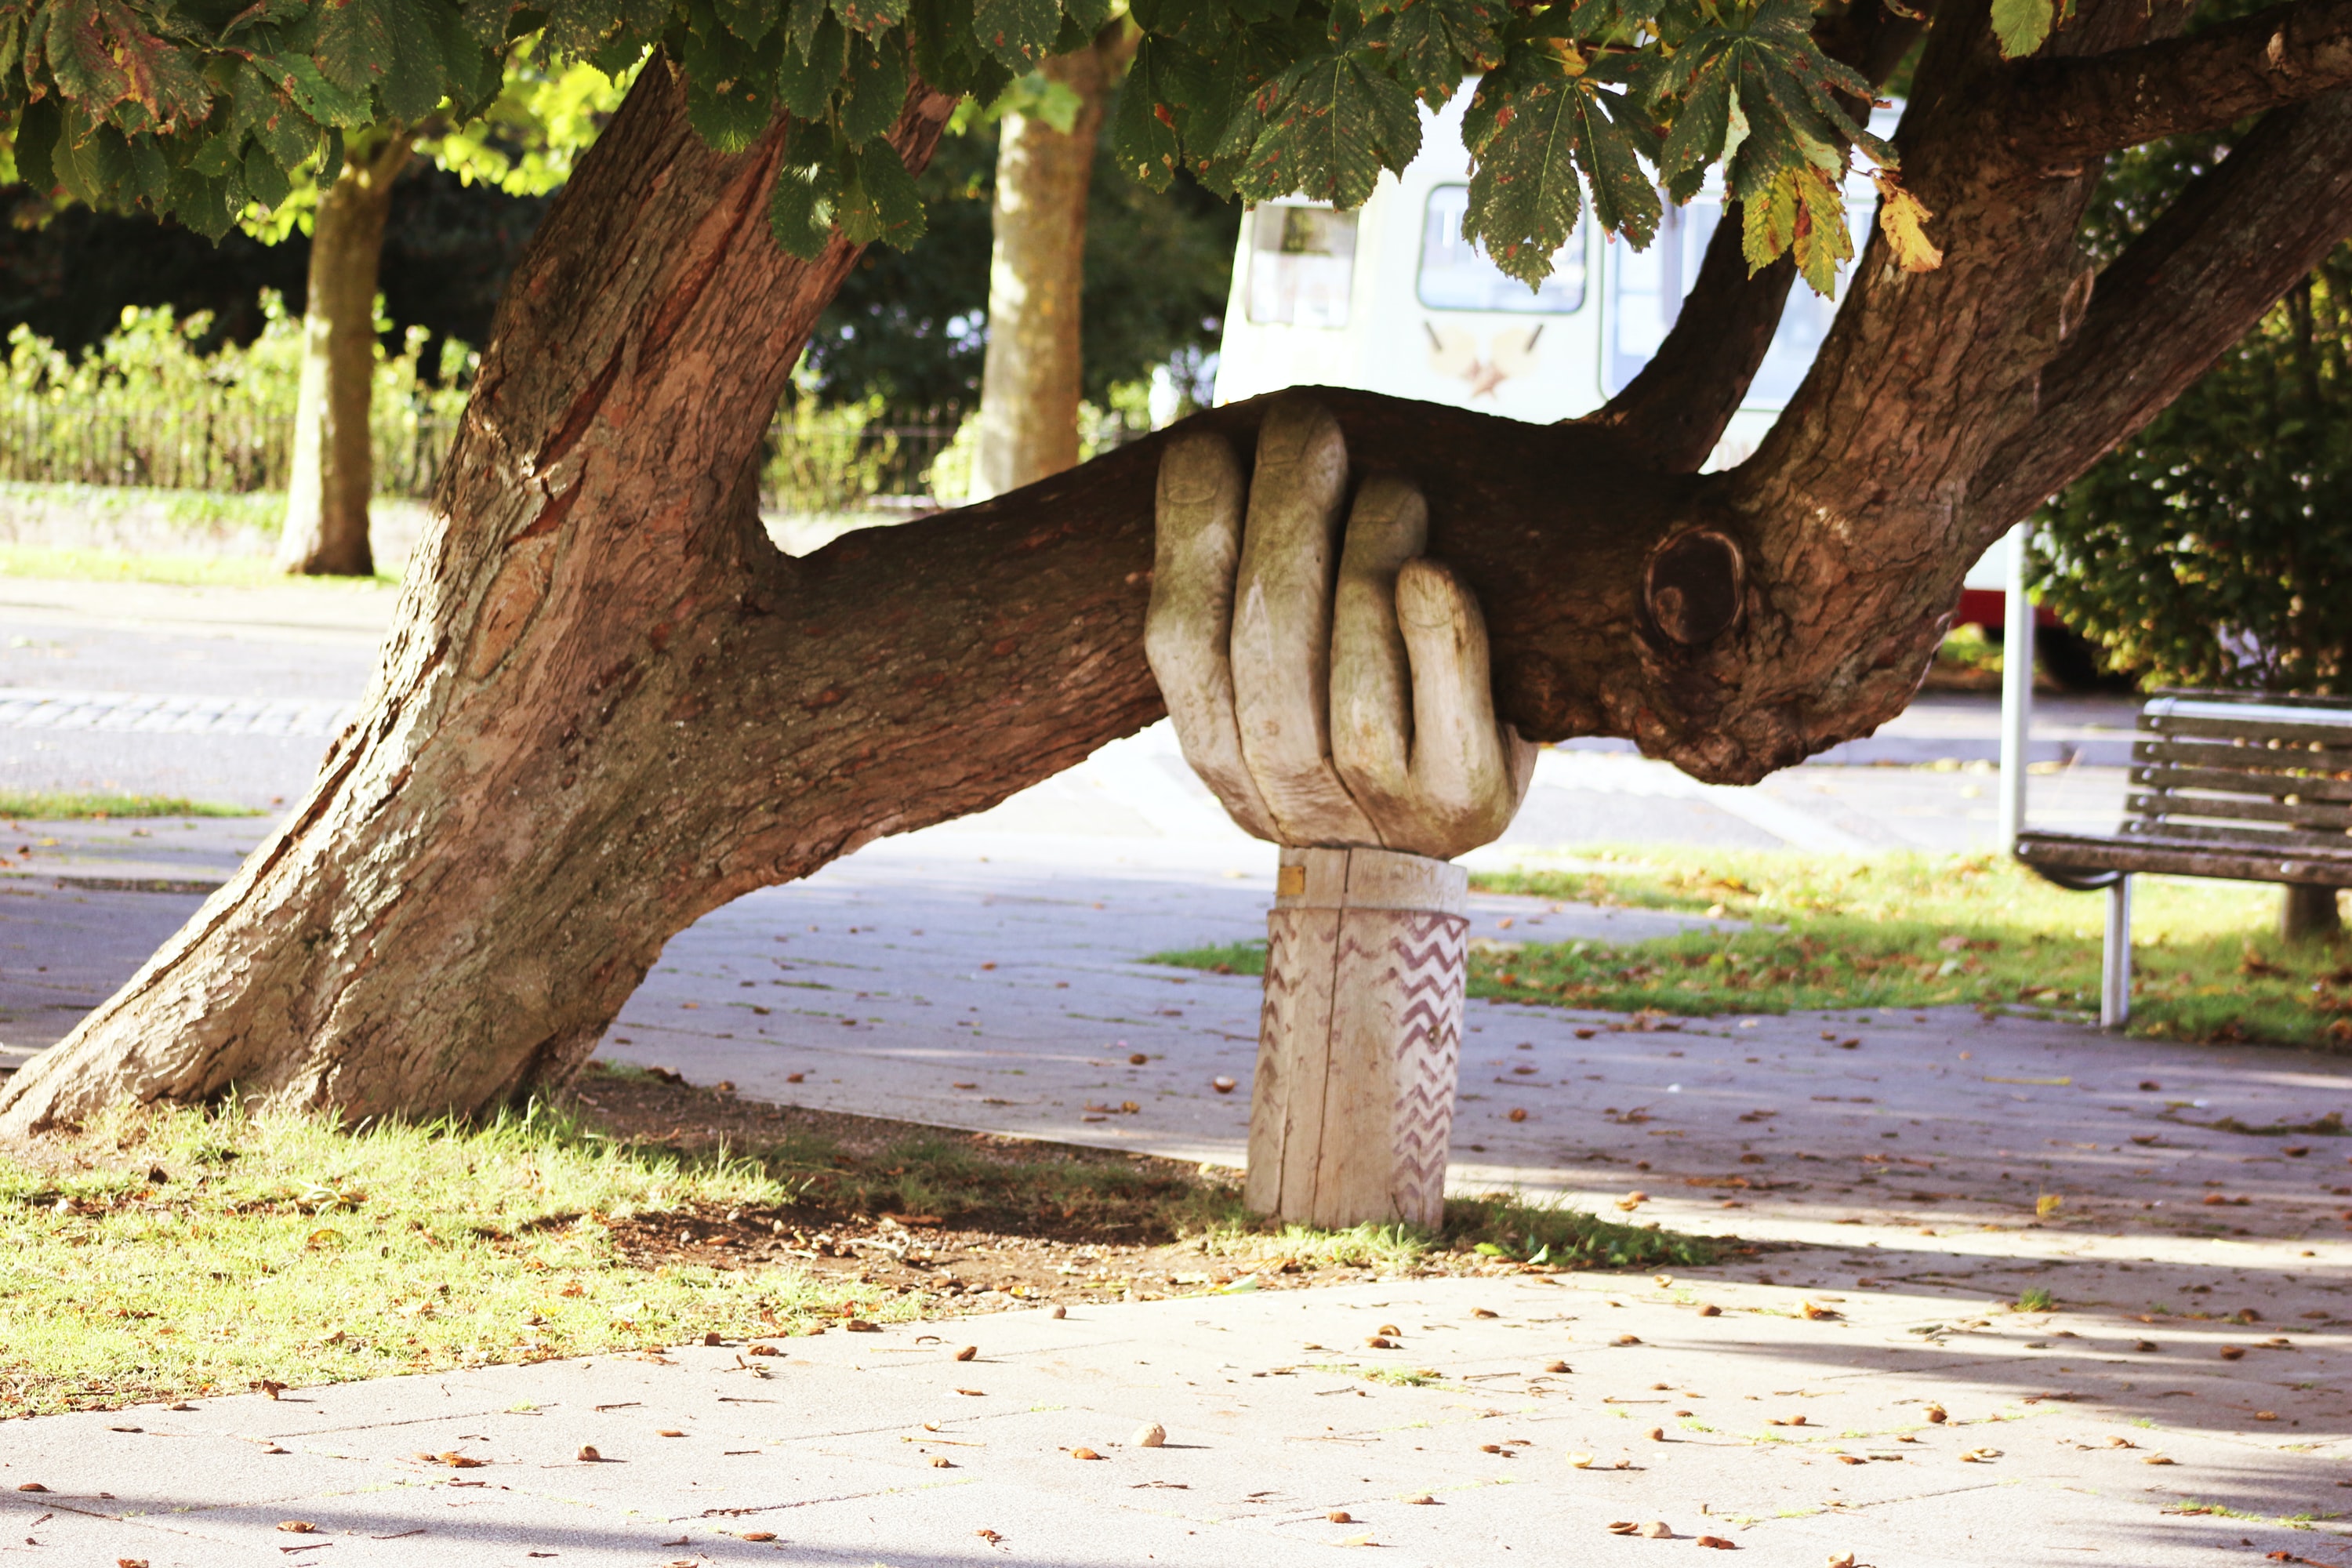  A hand shaped structure holding up a leaning tree trunk, representing collaboration.